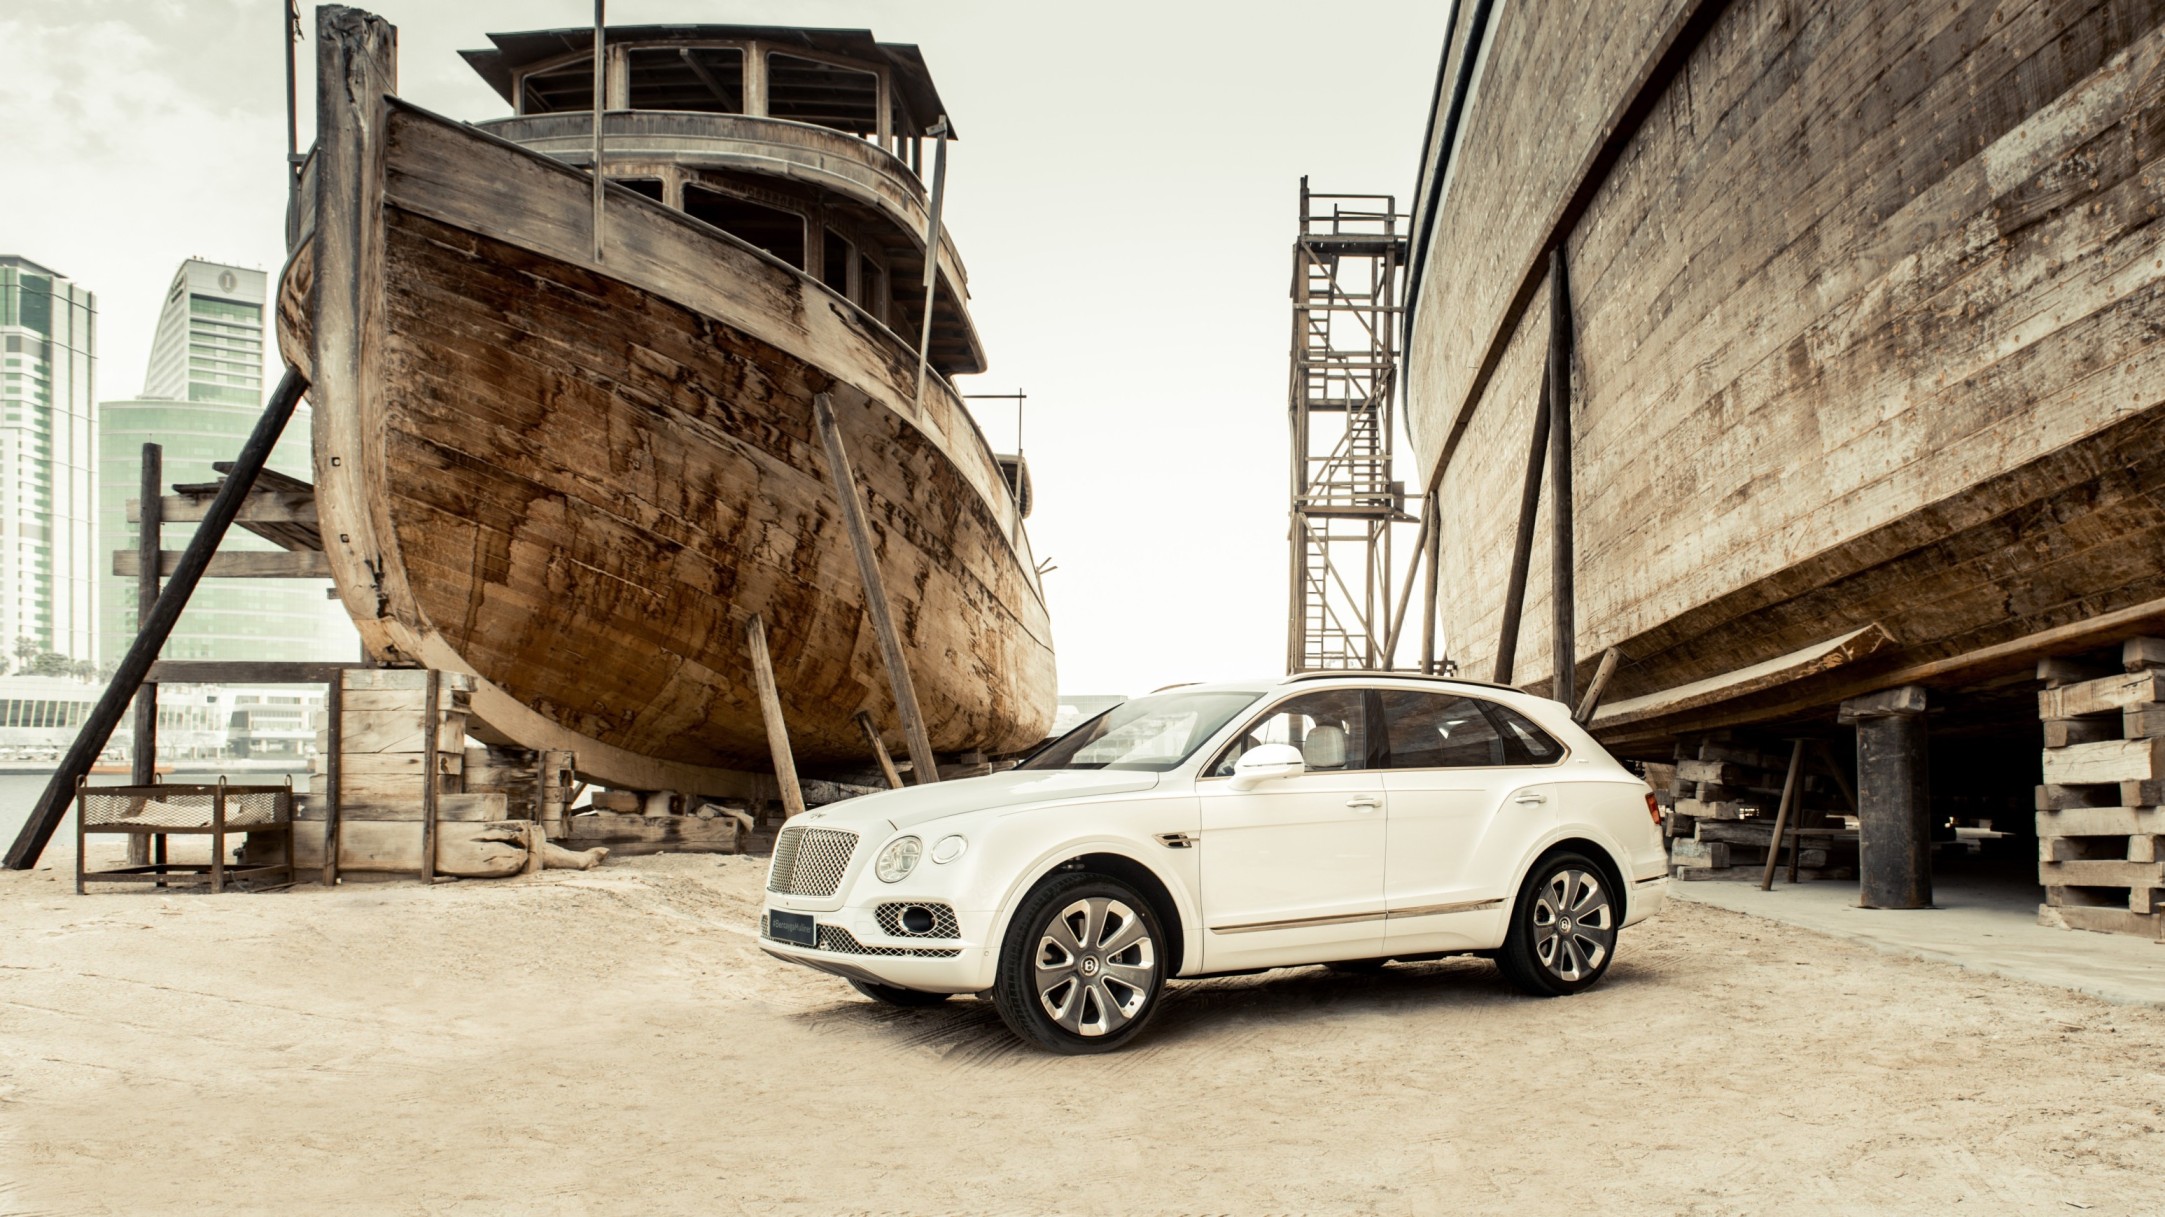 Bentayga Defined and Has Grown Luxury SUV Segment Since Launch